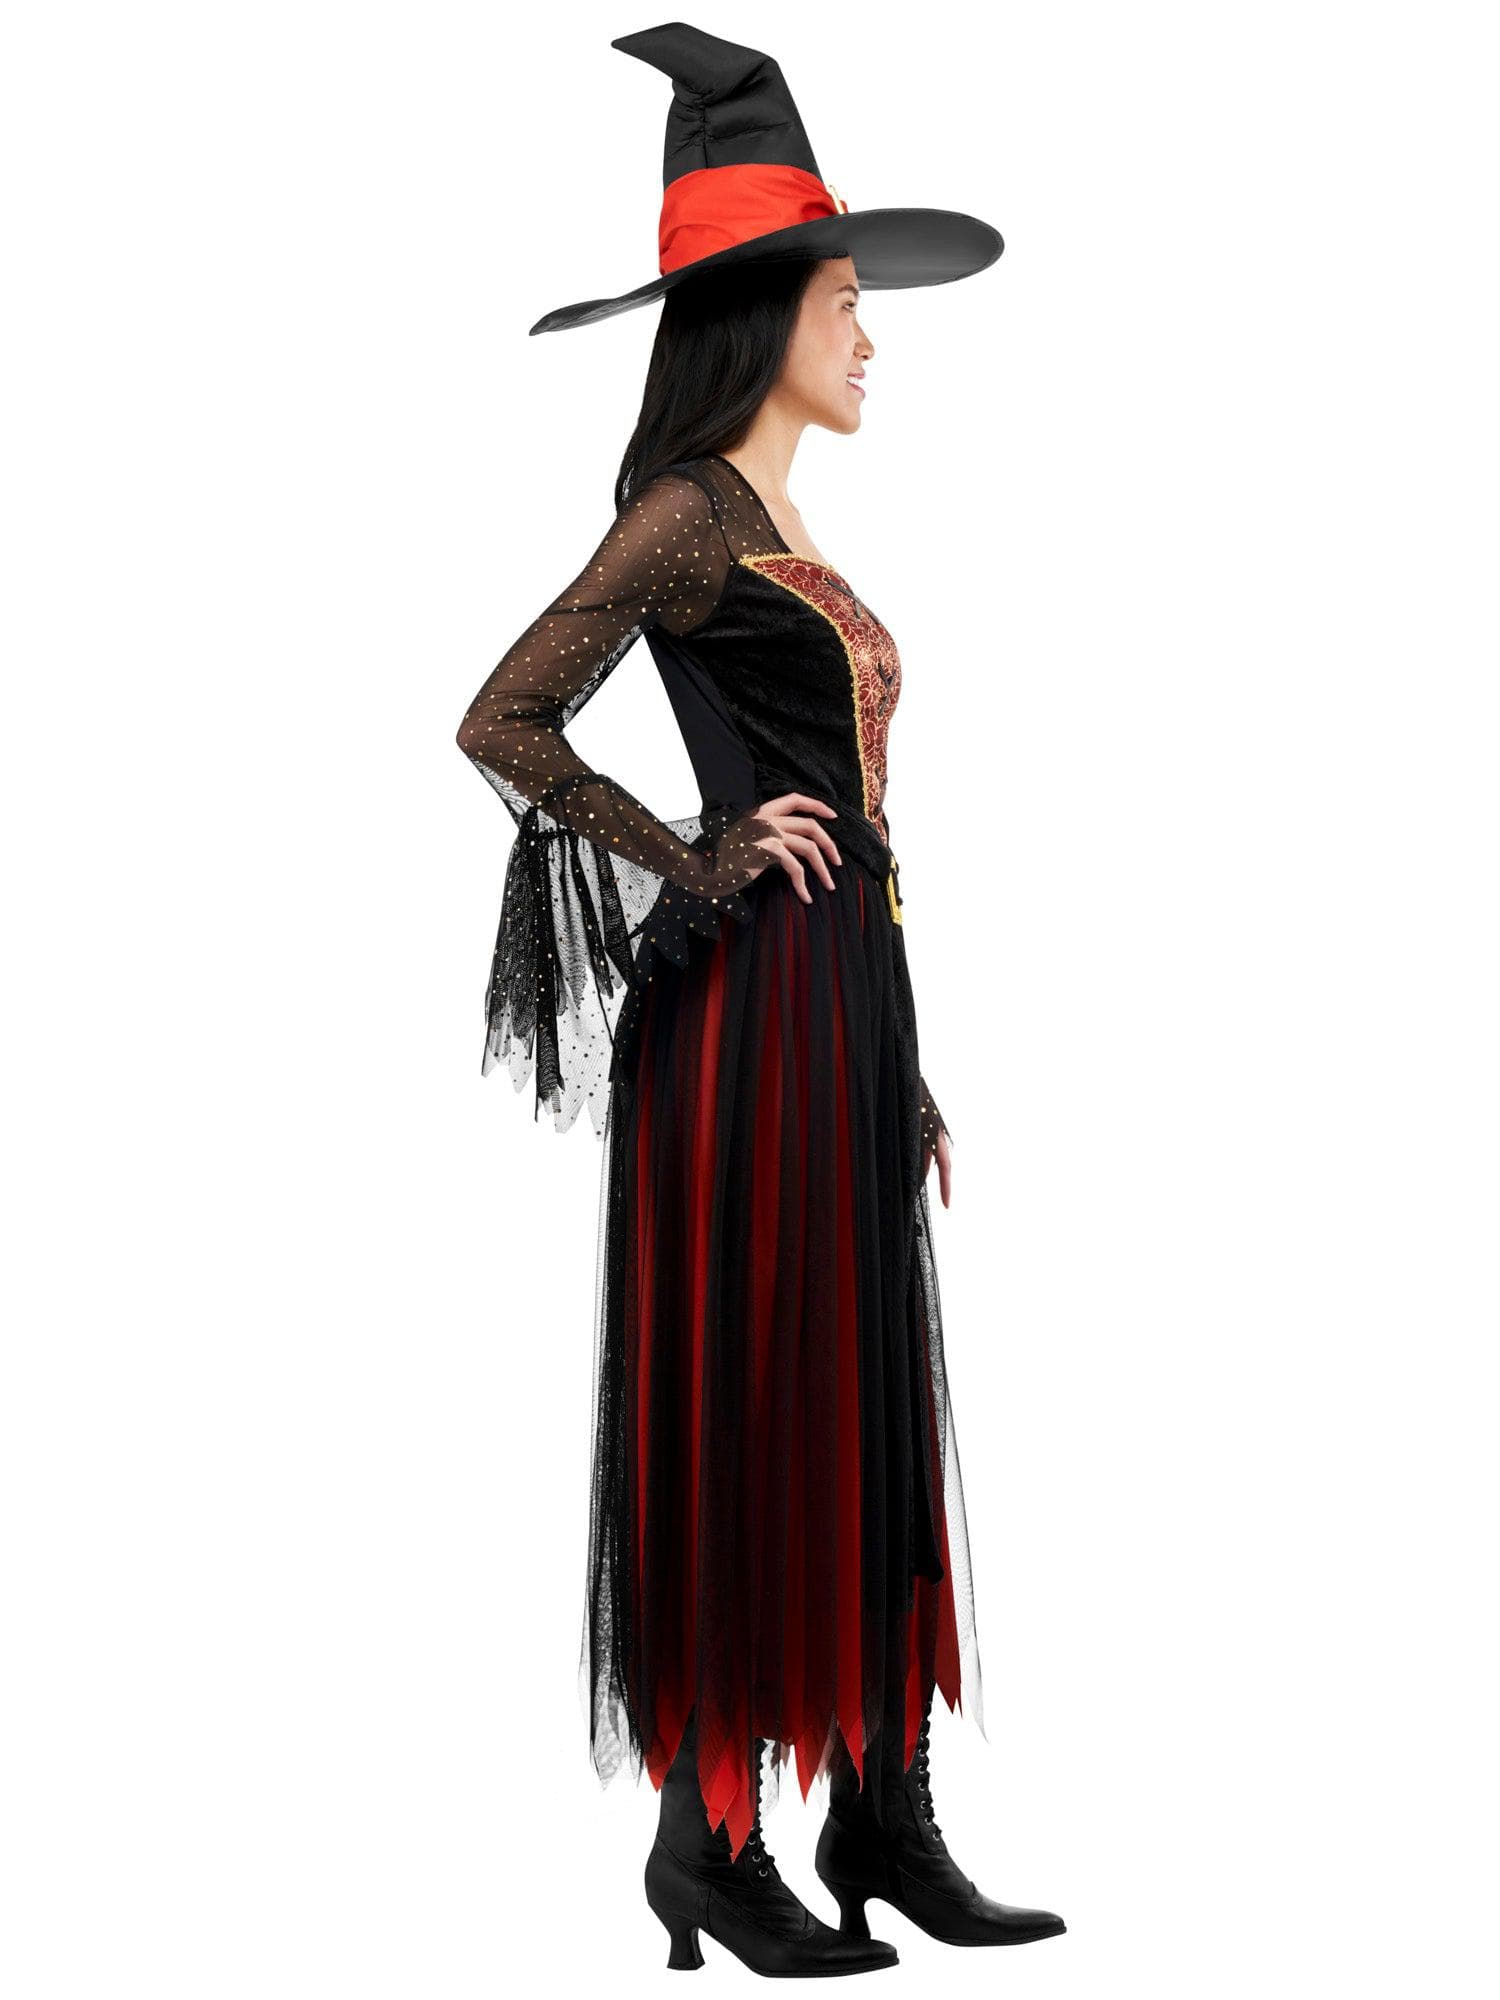 Women's Black and Orange Enchanted Witch Costume - costumes.com